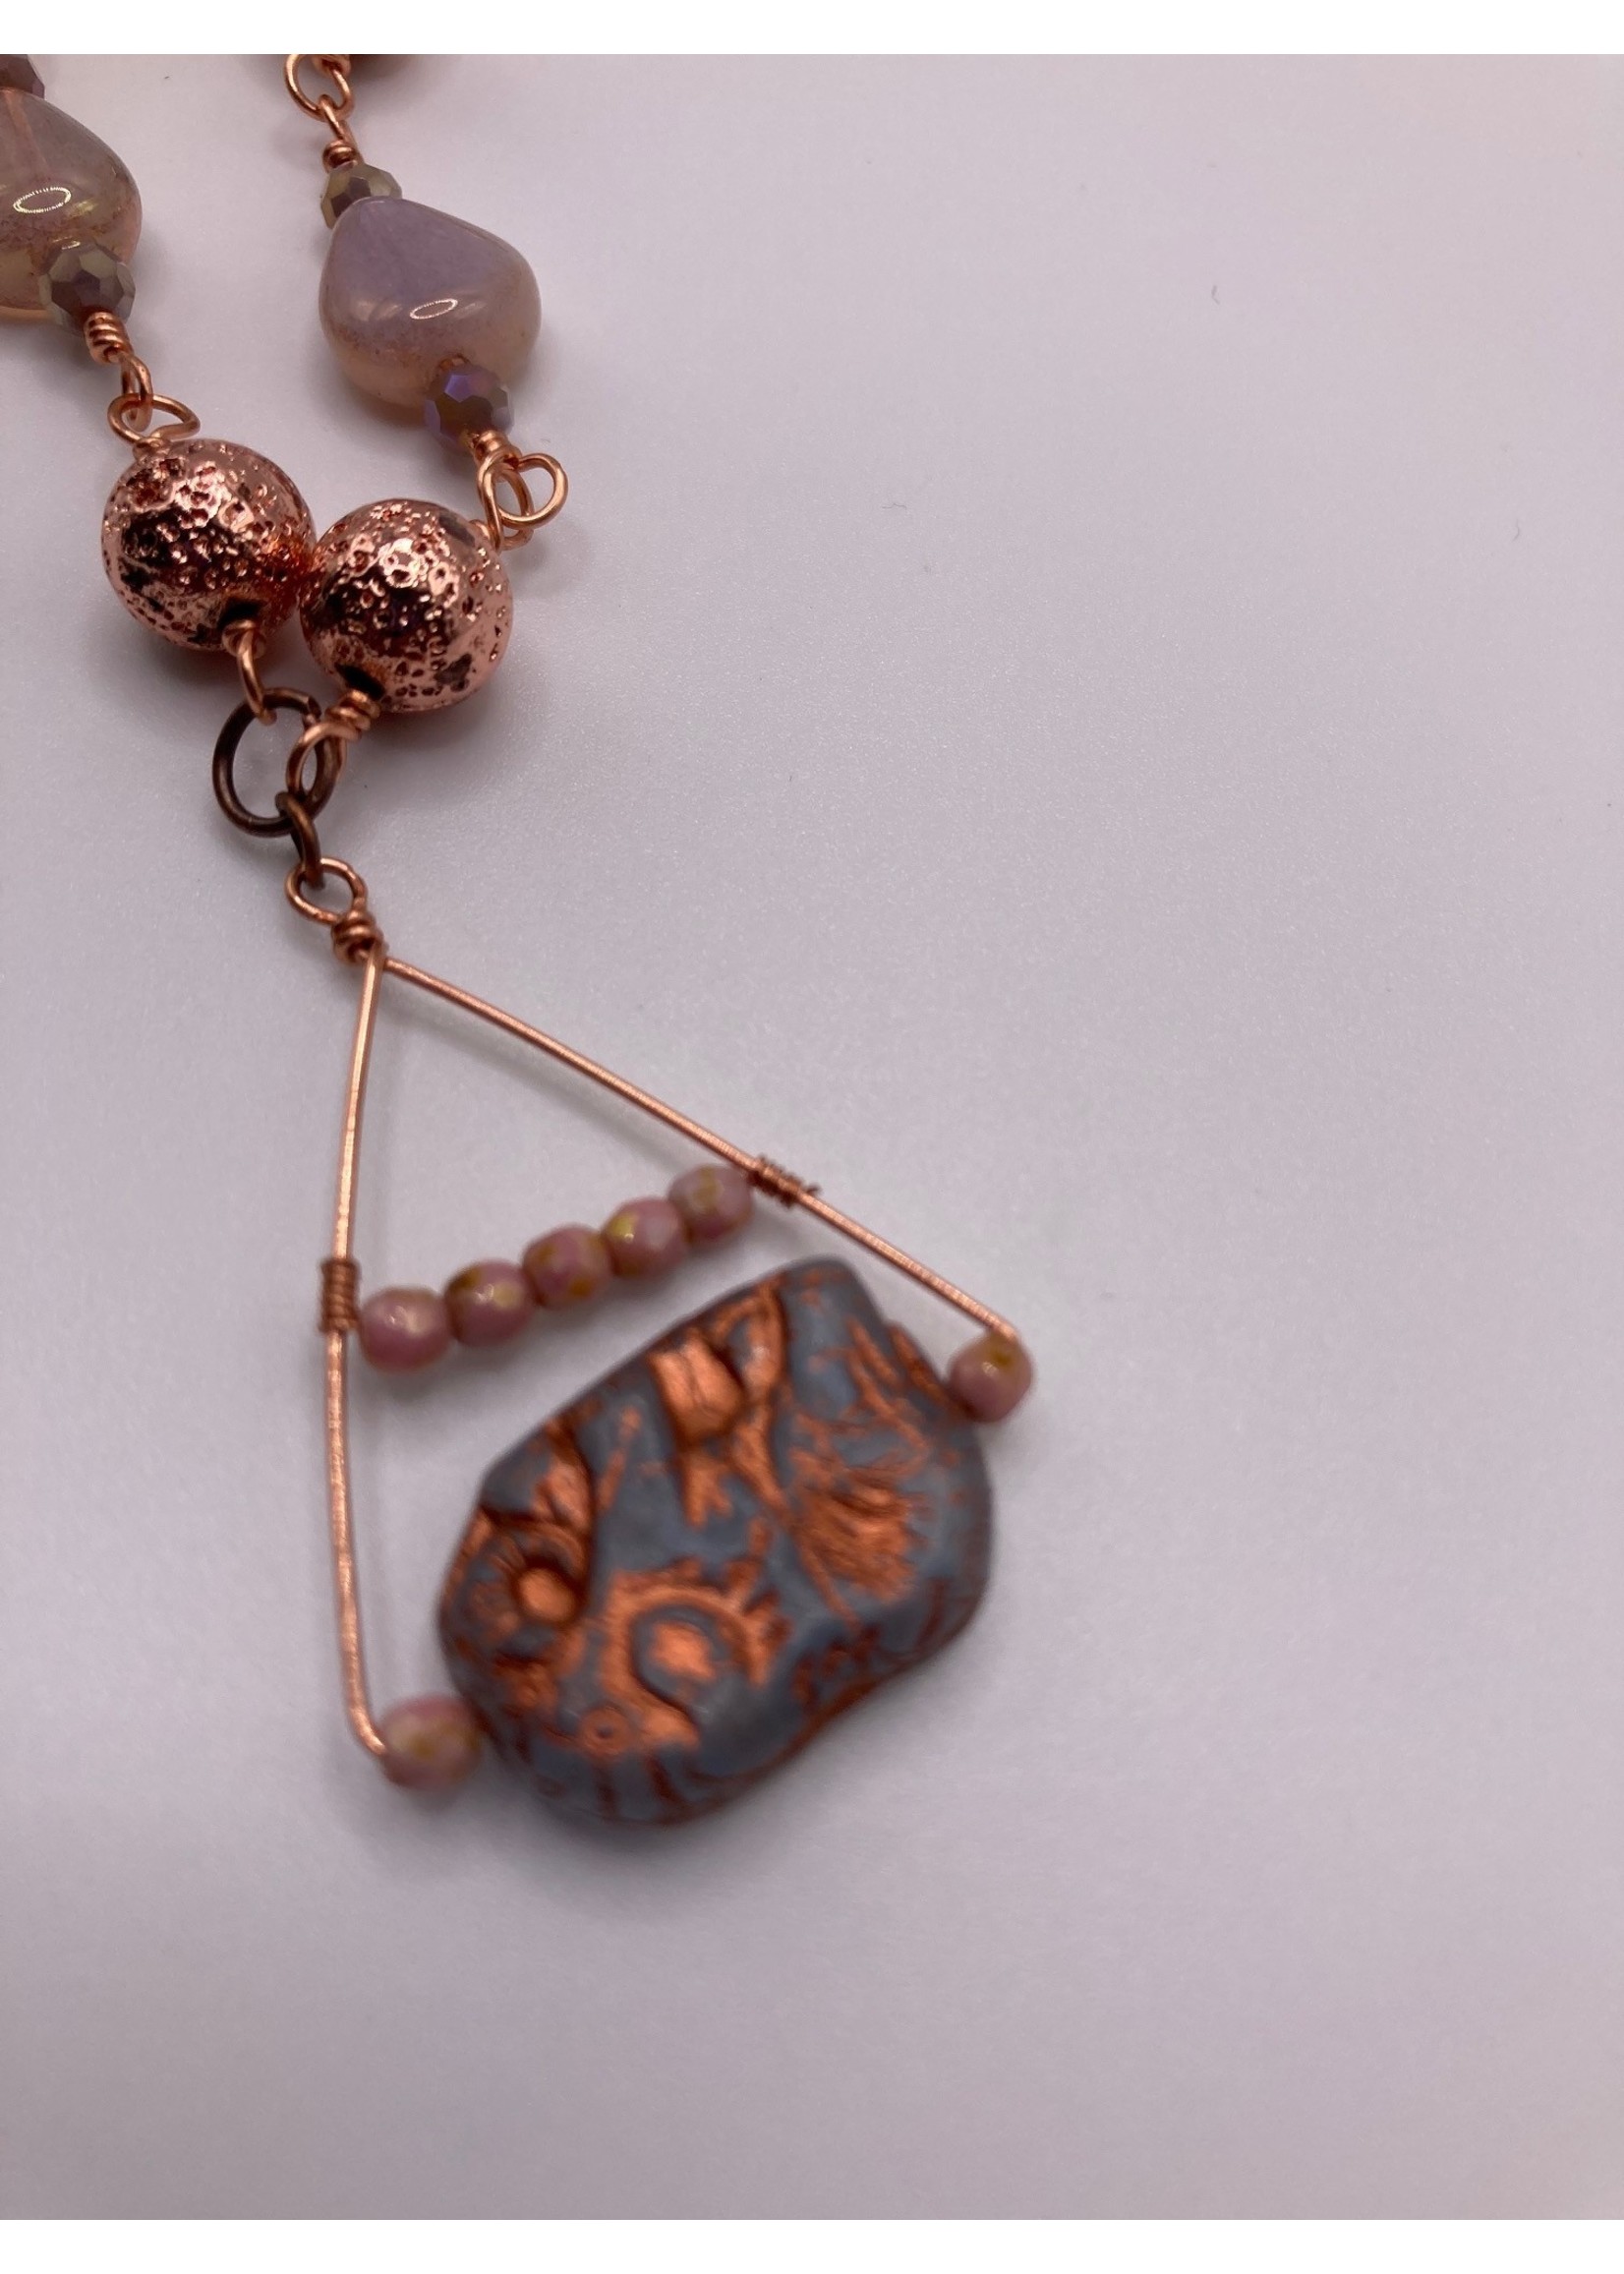 Our Twisted Dahlia Opalite Triangle Beads and Copper Covered Lava Beads with Czech Glass Elephant Necklace